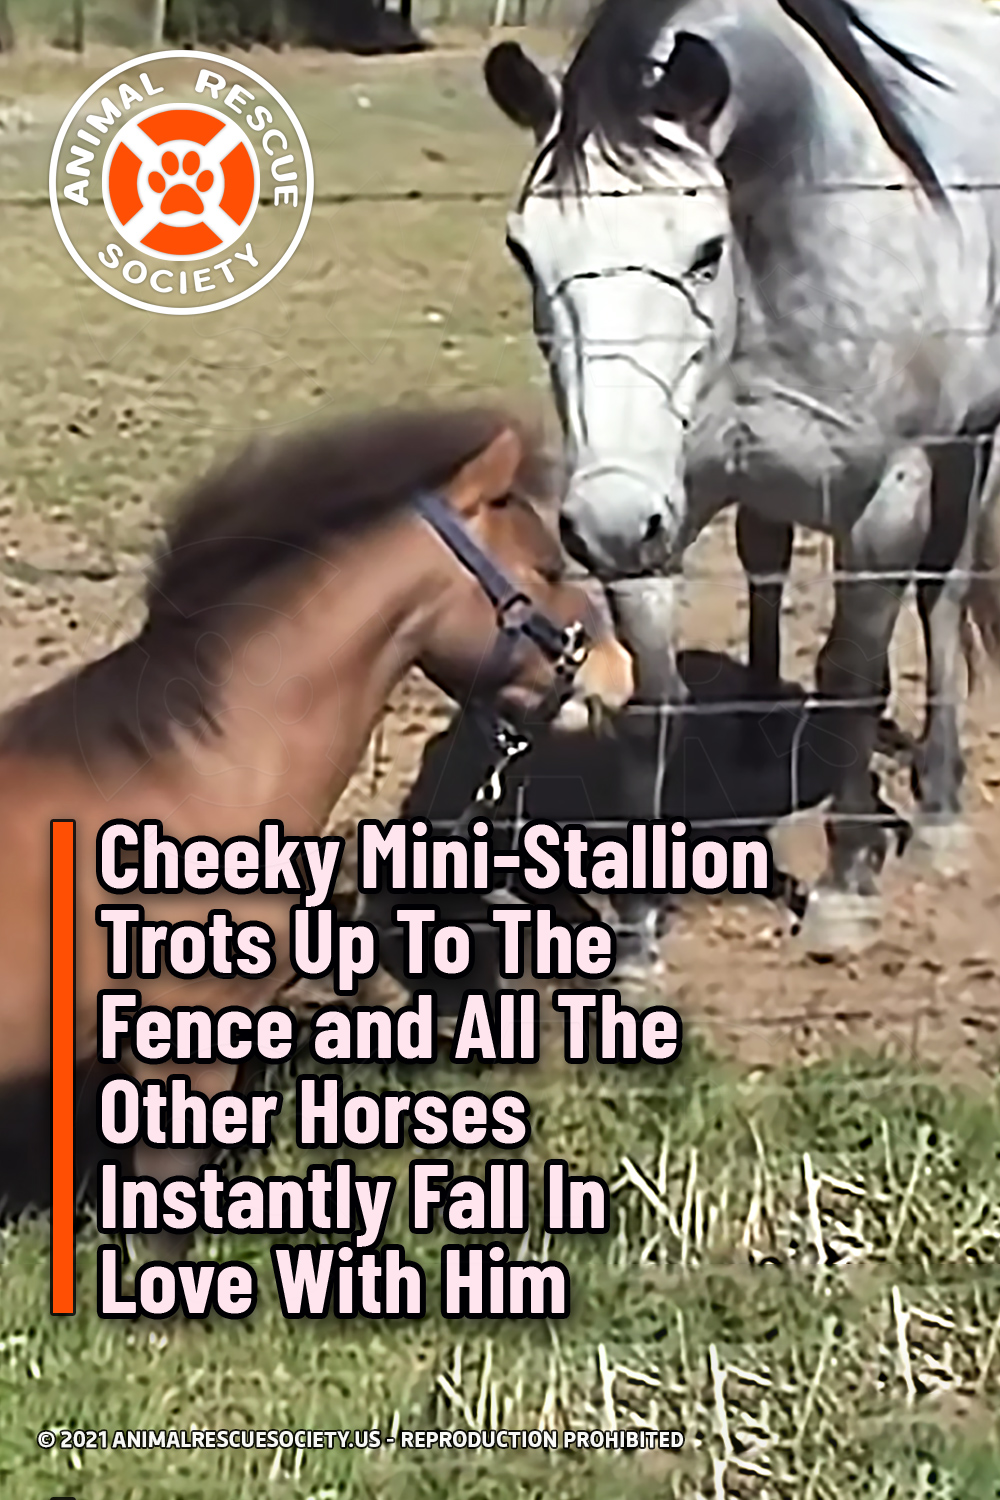 Cheeky Mini-Stallion Trots Up To The Fence and All The Other Horses Instantly Fall In Love With Him